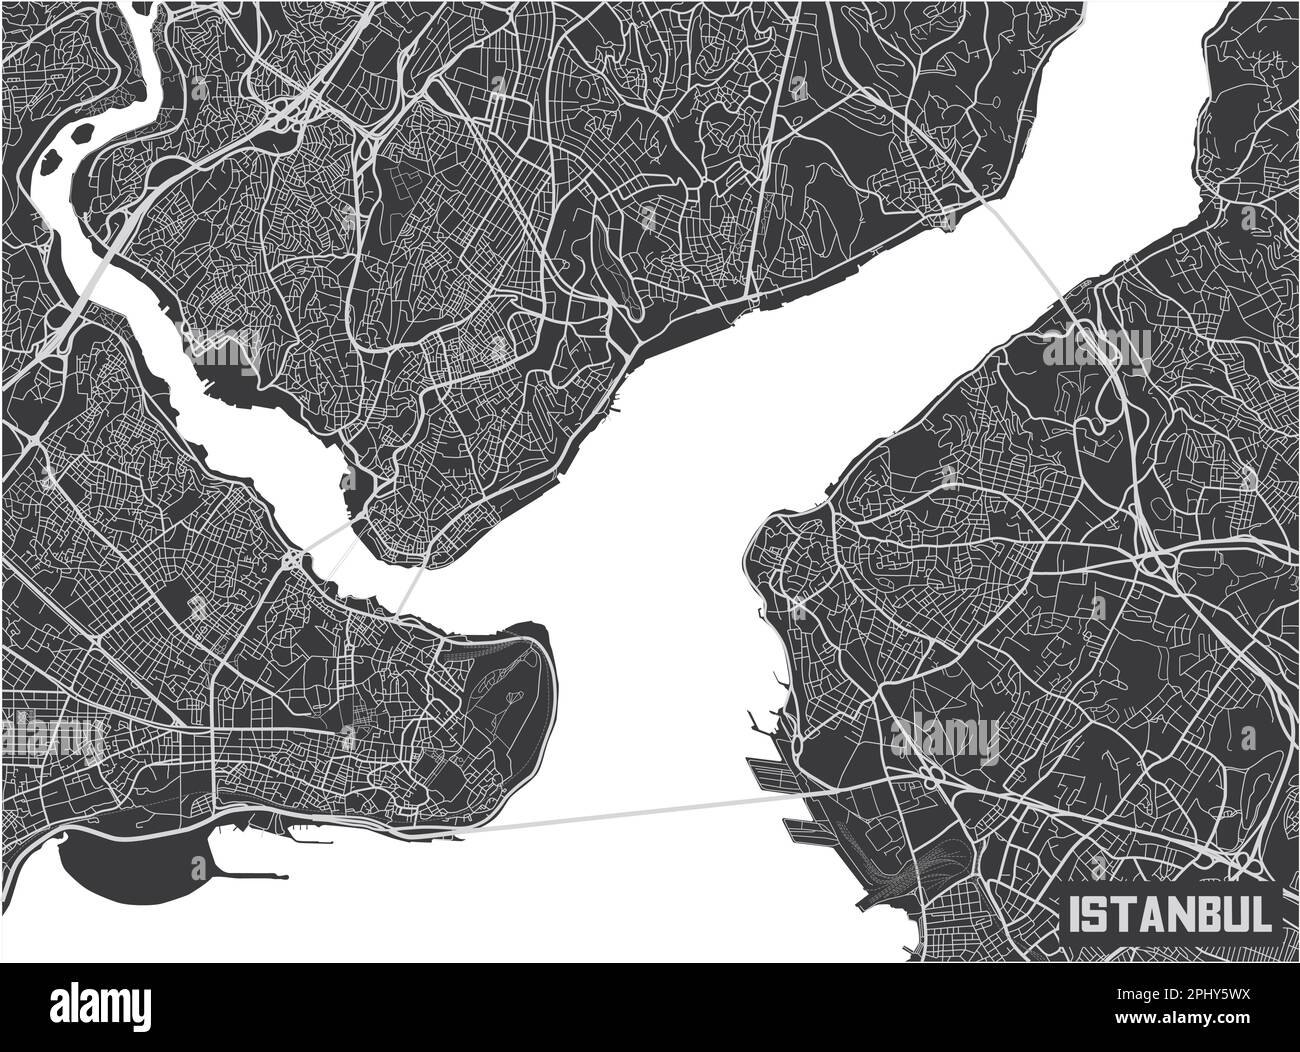 Minimalistic Istanbul city map poster design. Stock Vector